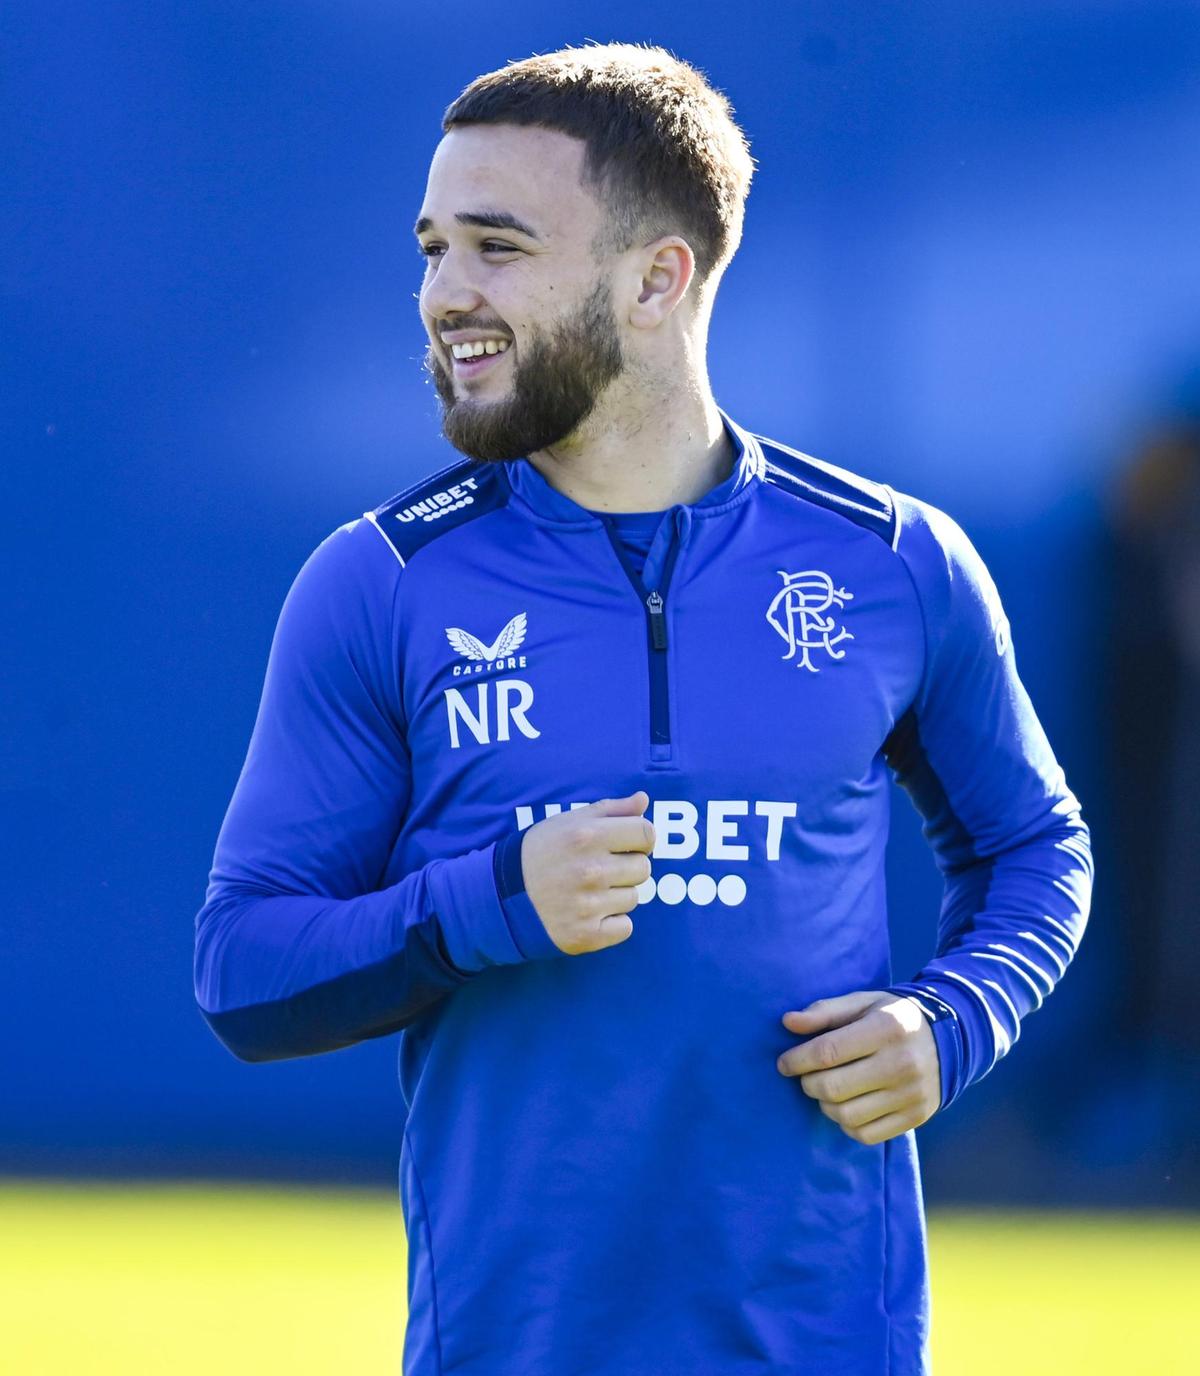 If we want to achieve something we need him here' - best player revelation | The Scotsman